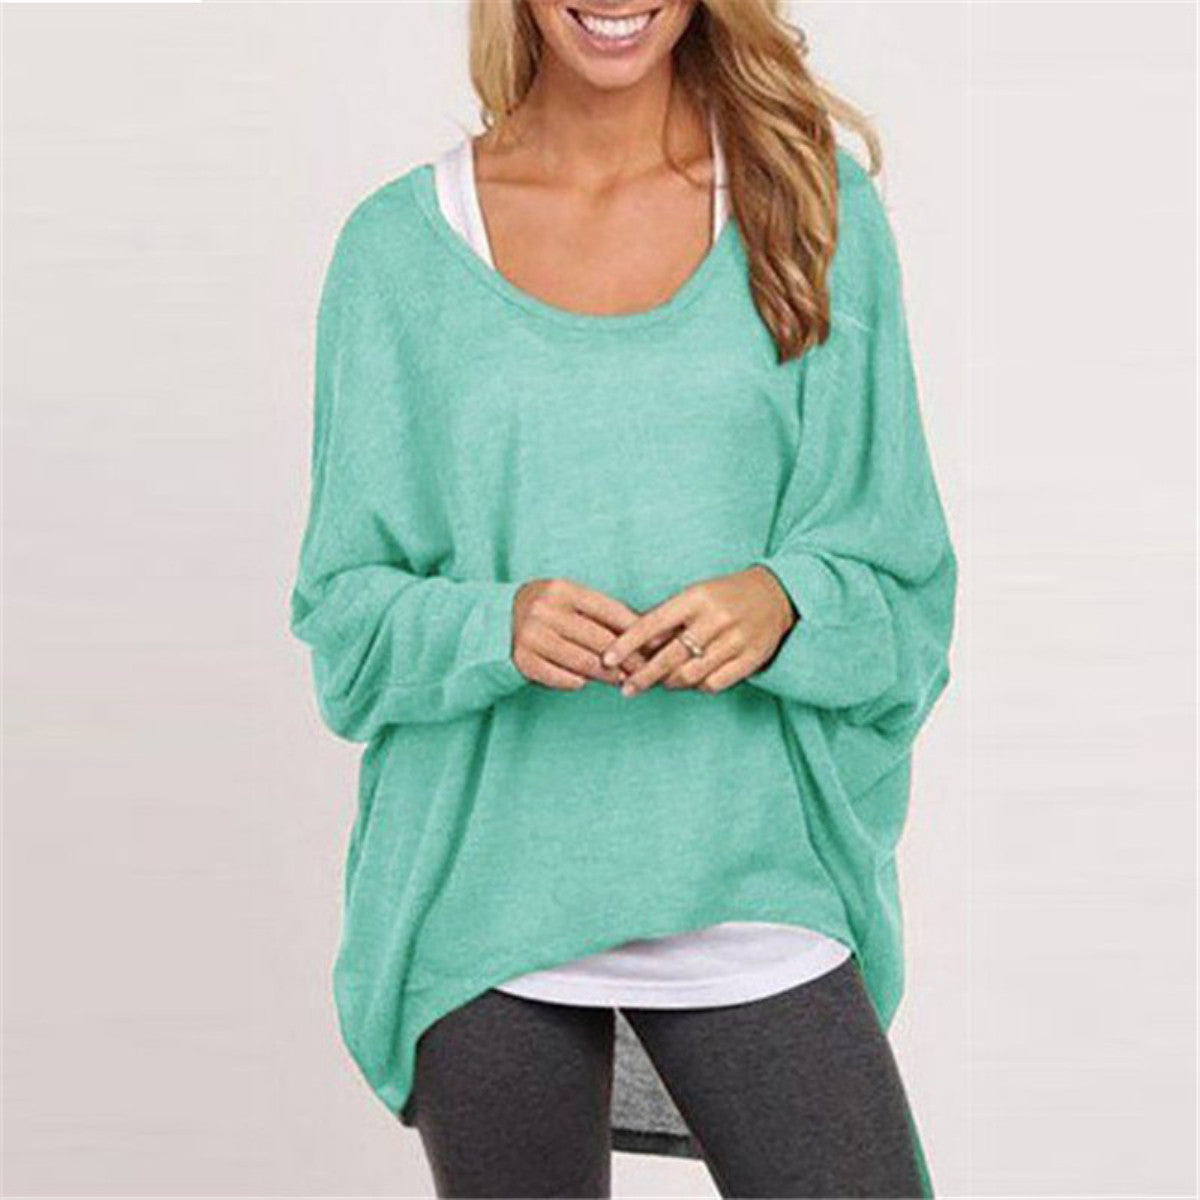 Women Sweater Jumper Pullover Batwing Long Sleeve Casual Loose Solid Blouse Shirt Top Plus - CelebritystyleFashion.com.au online clothing shop australia